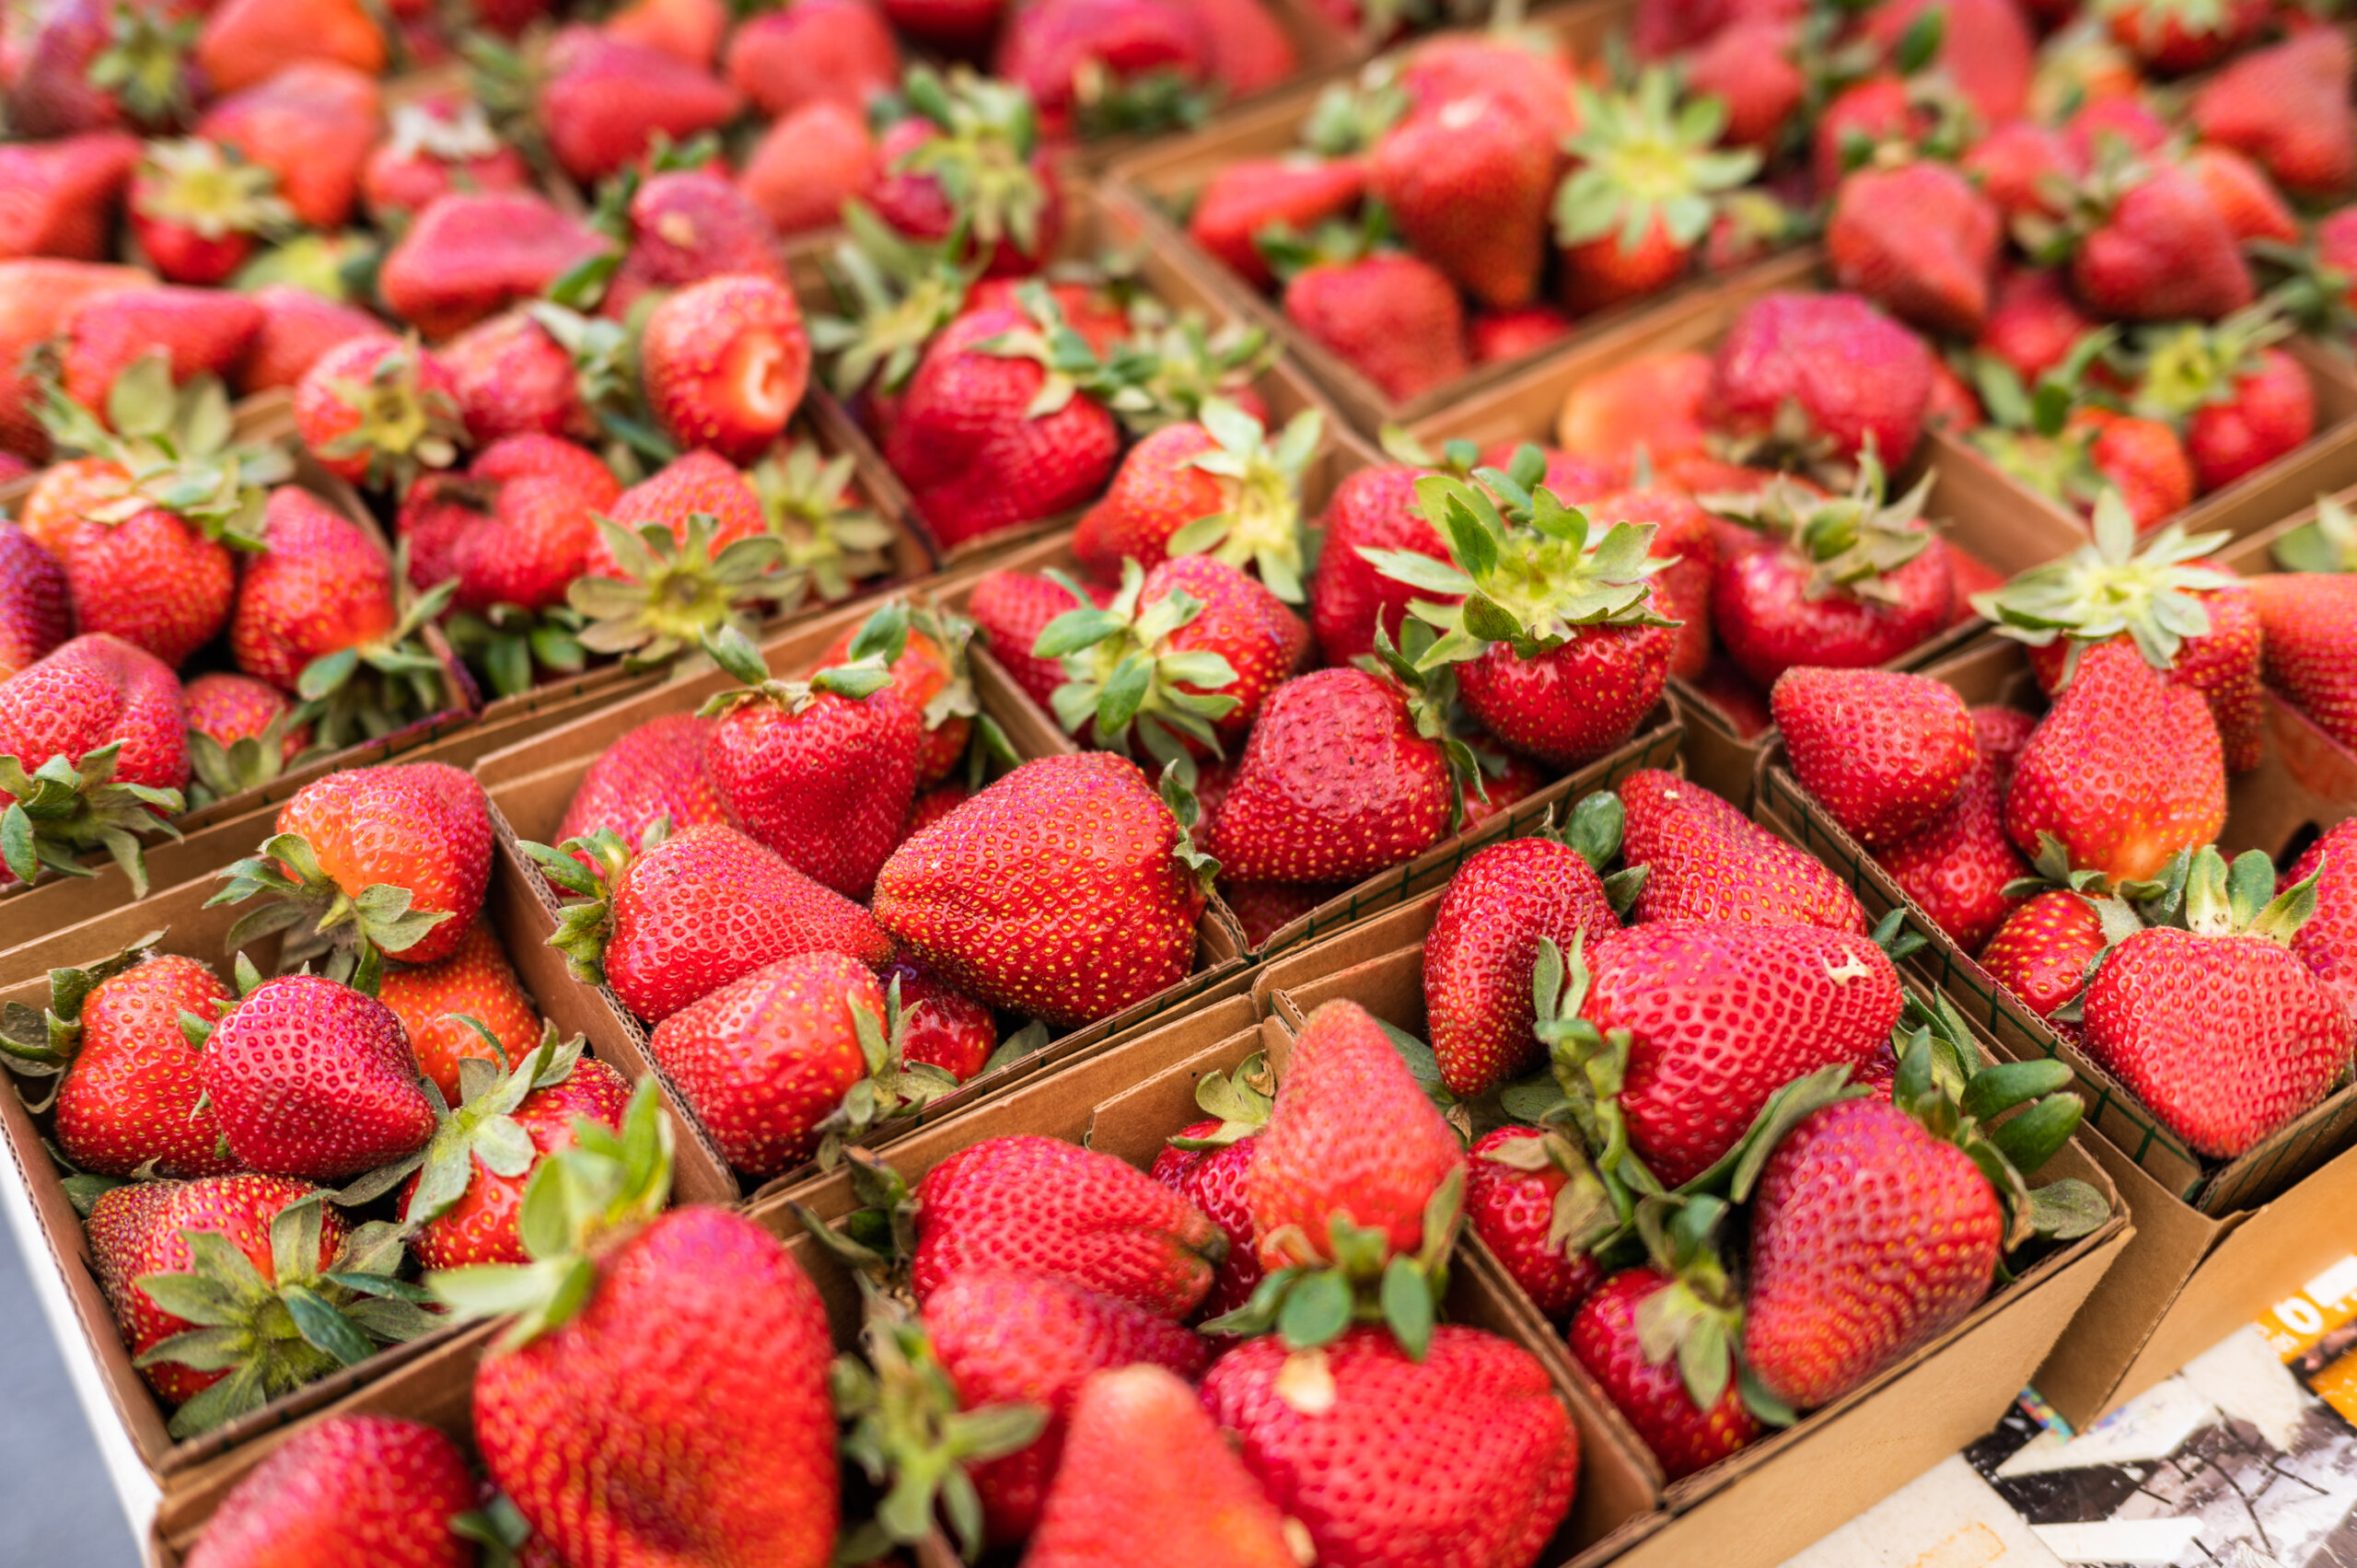 Strawberries for sale at the Felton Farmers Market